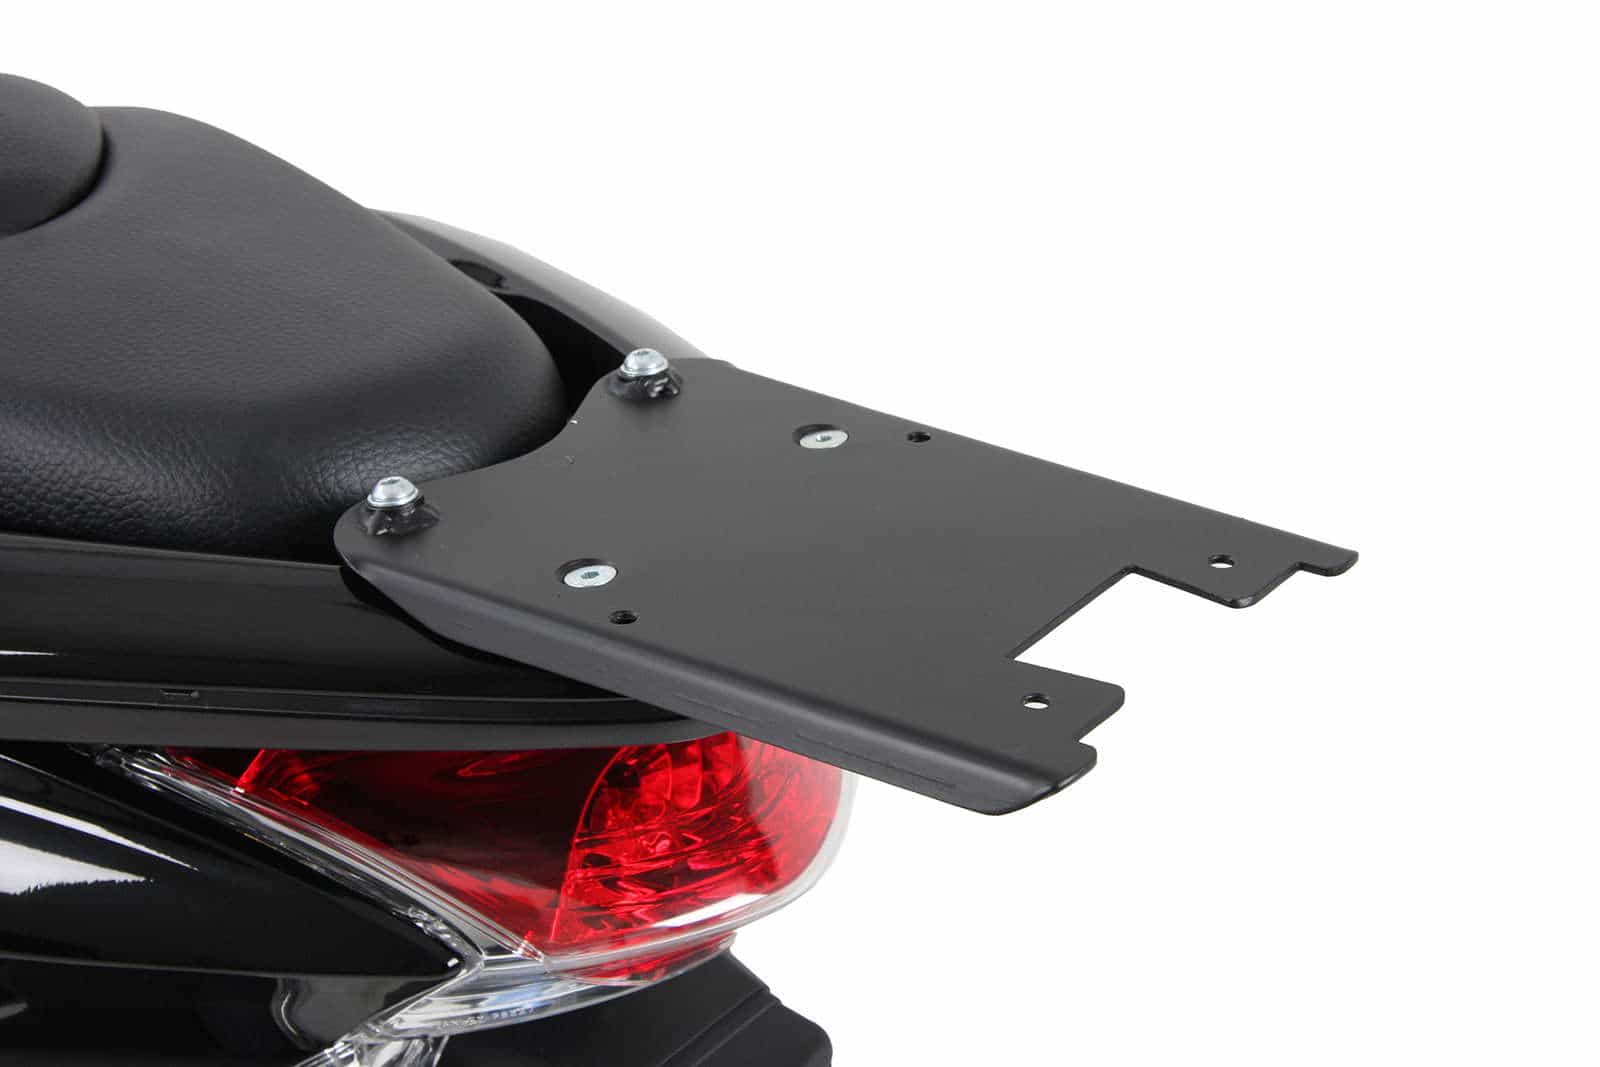 Adapter for mounting any Universal-top case – black for Honda PCX 125